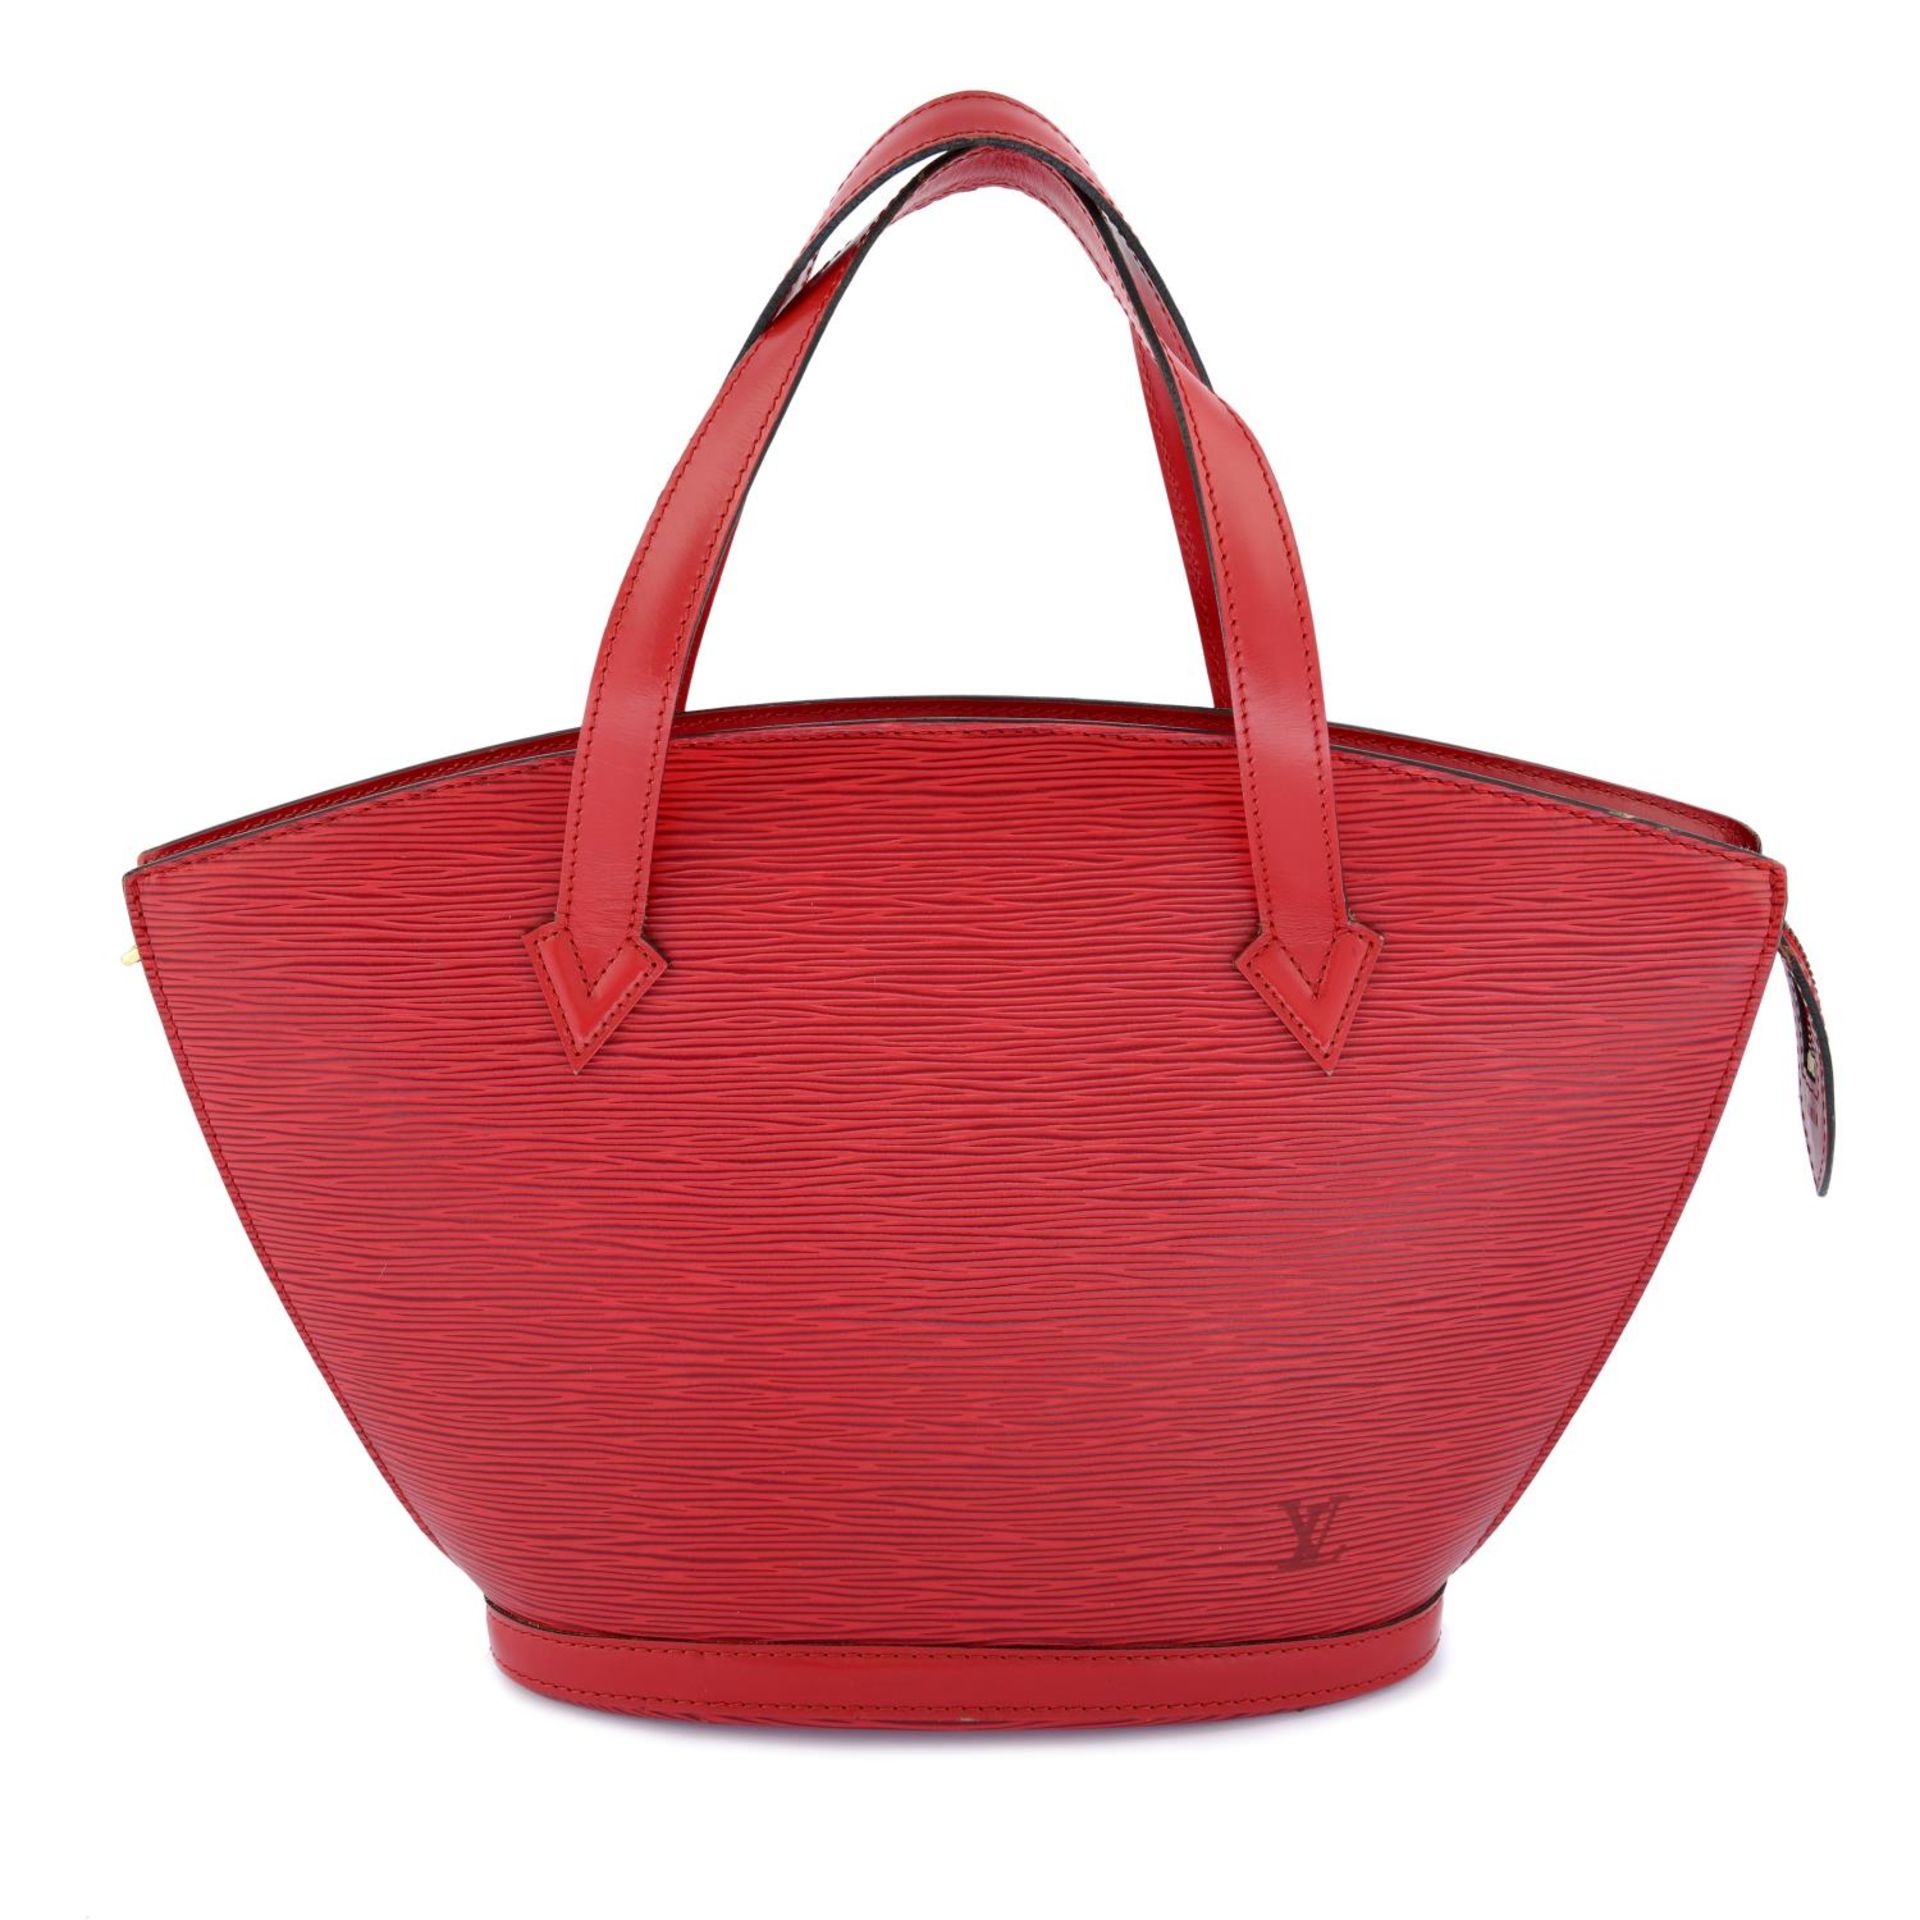 LOUIS VUITTON - a red Epi leather St.